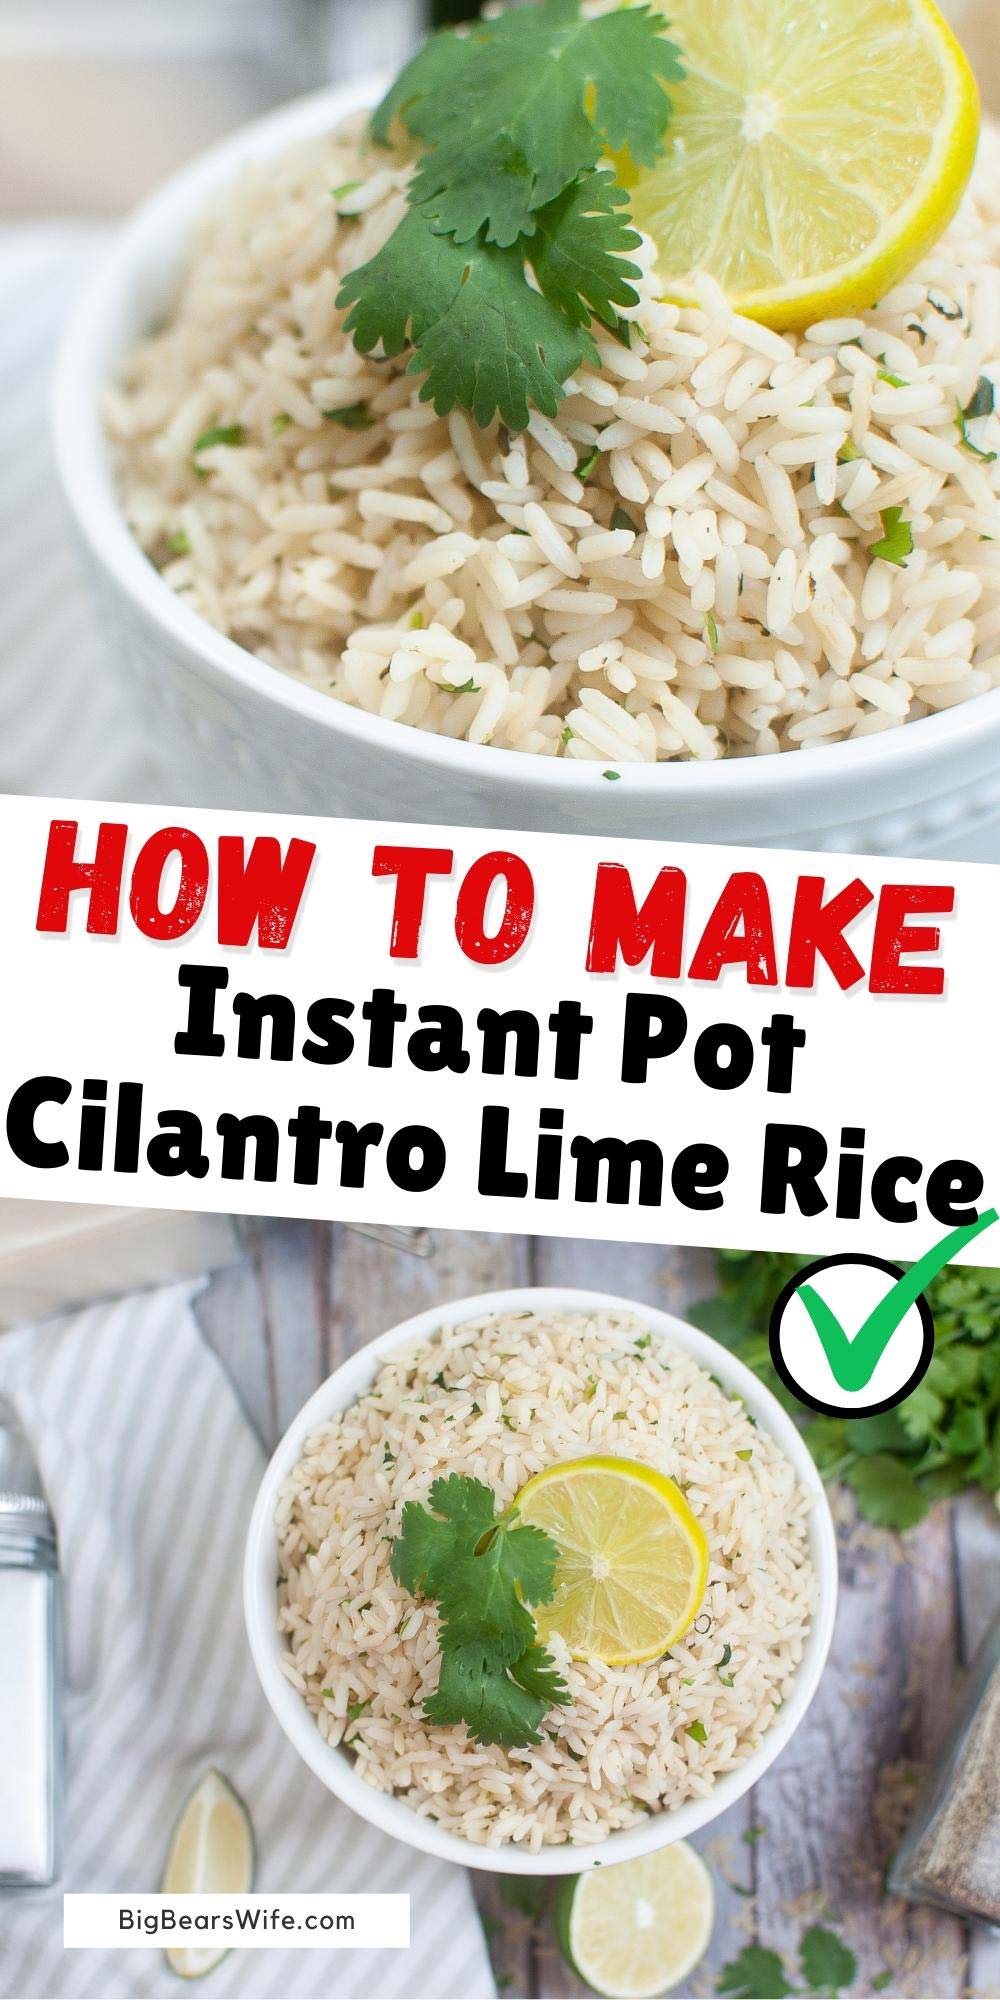 This super easy Instant Pot Cilantro Lime Rice is similar to Chipotle's! Great served with Tacos, Burritos or any Mexican food! via @bigbearswife